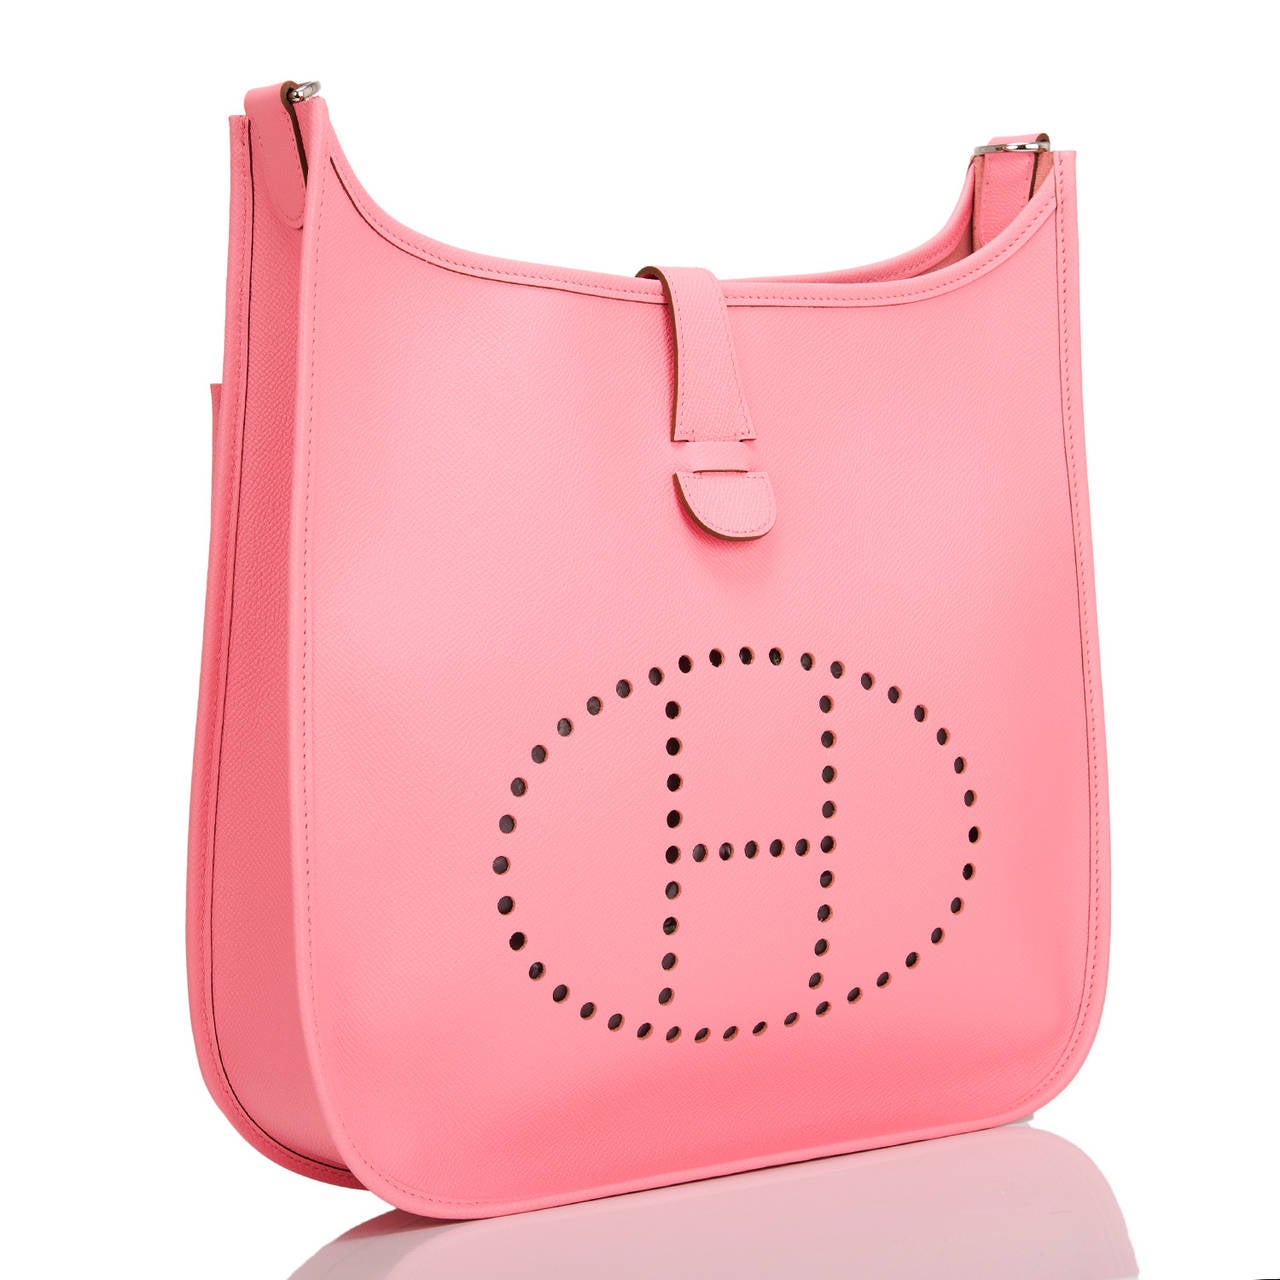 Hermes Rose Confetti (light pink) Evelyne III GM in epsom leather with palladium hardware.

This Evelyne III is made in one of the most coveted new colors – Rose Confetti – in rich textured epsom leather and has palladium hardware, tonal